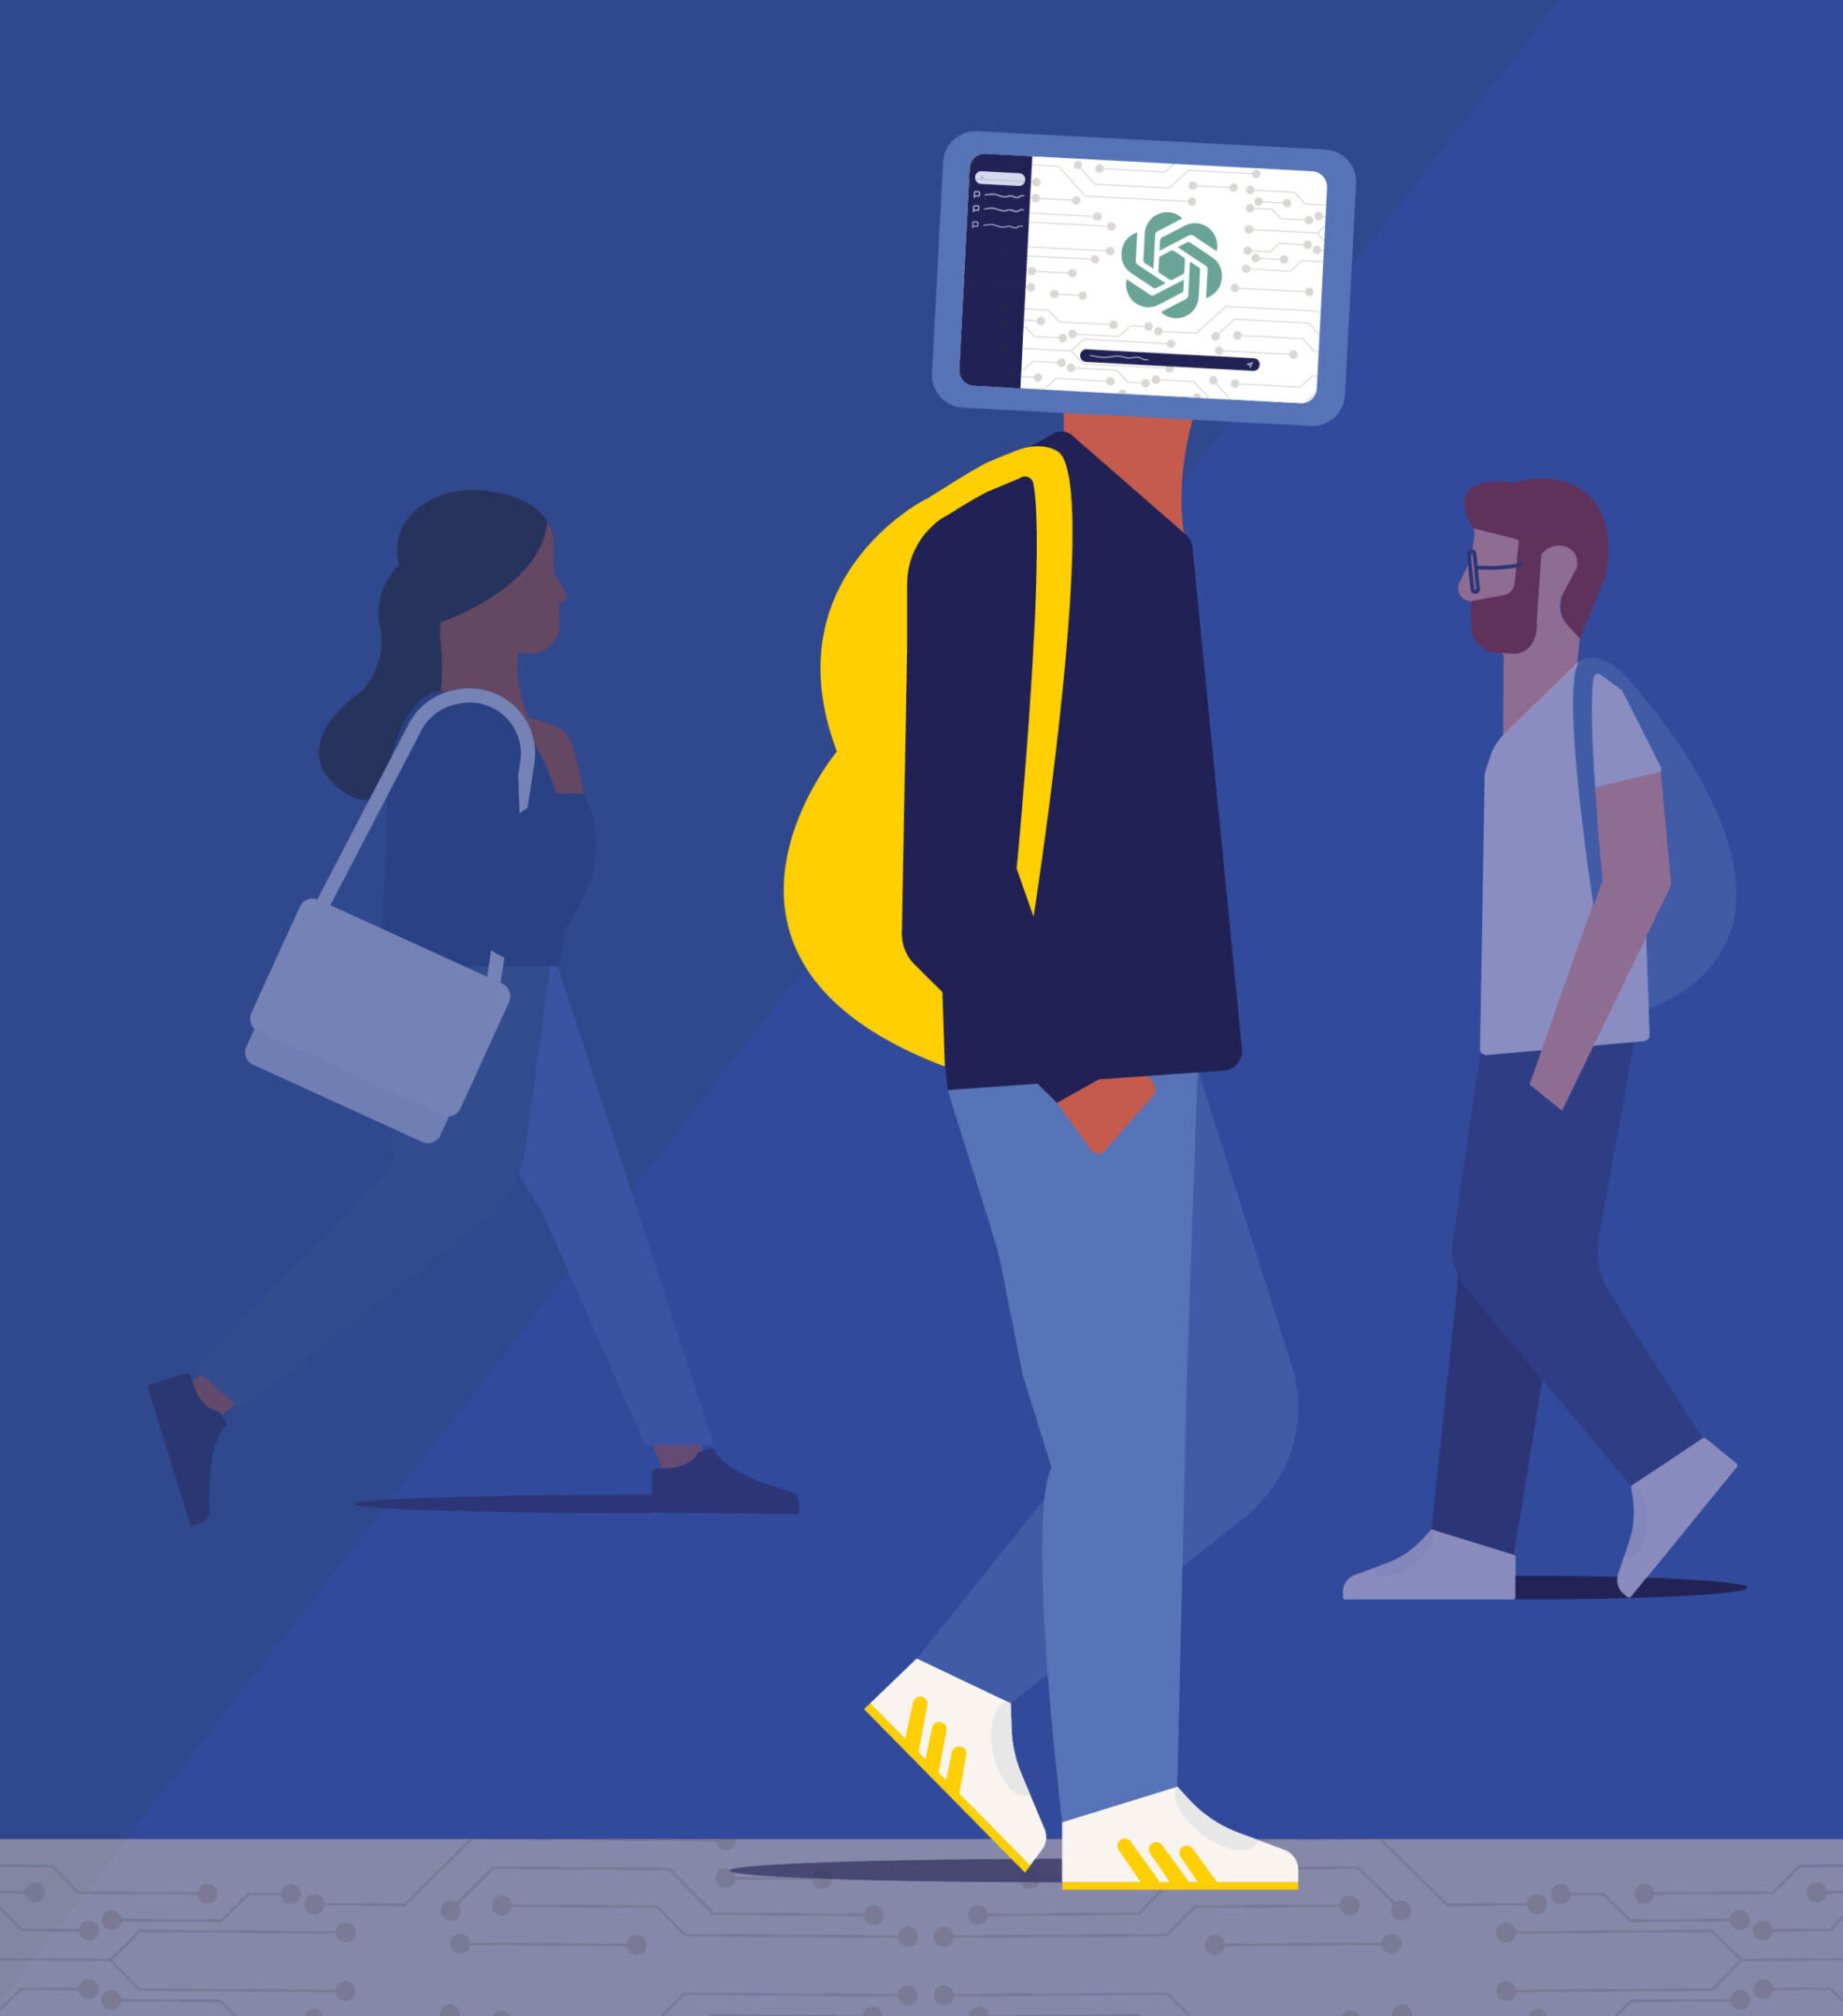 A student in blue with a yellow backpack, walking to the right, has a ChatGPT screen in place of a head. There are two other students in the background walking in each direction.